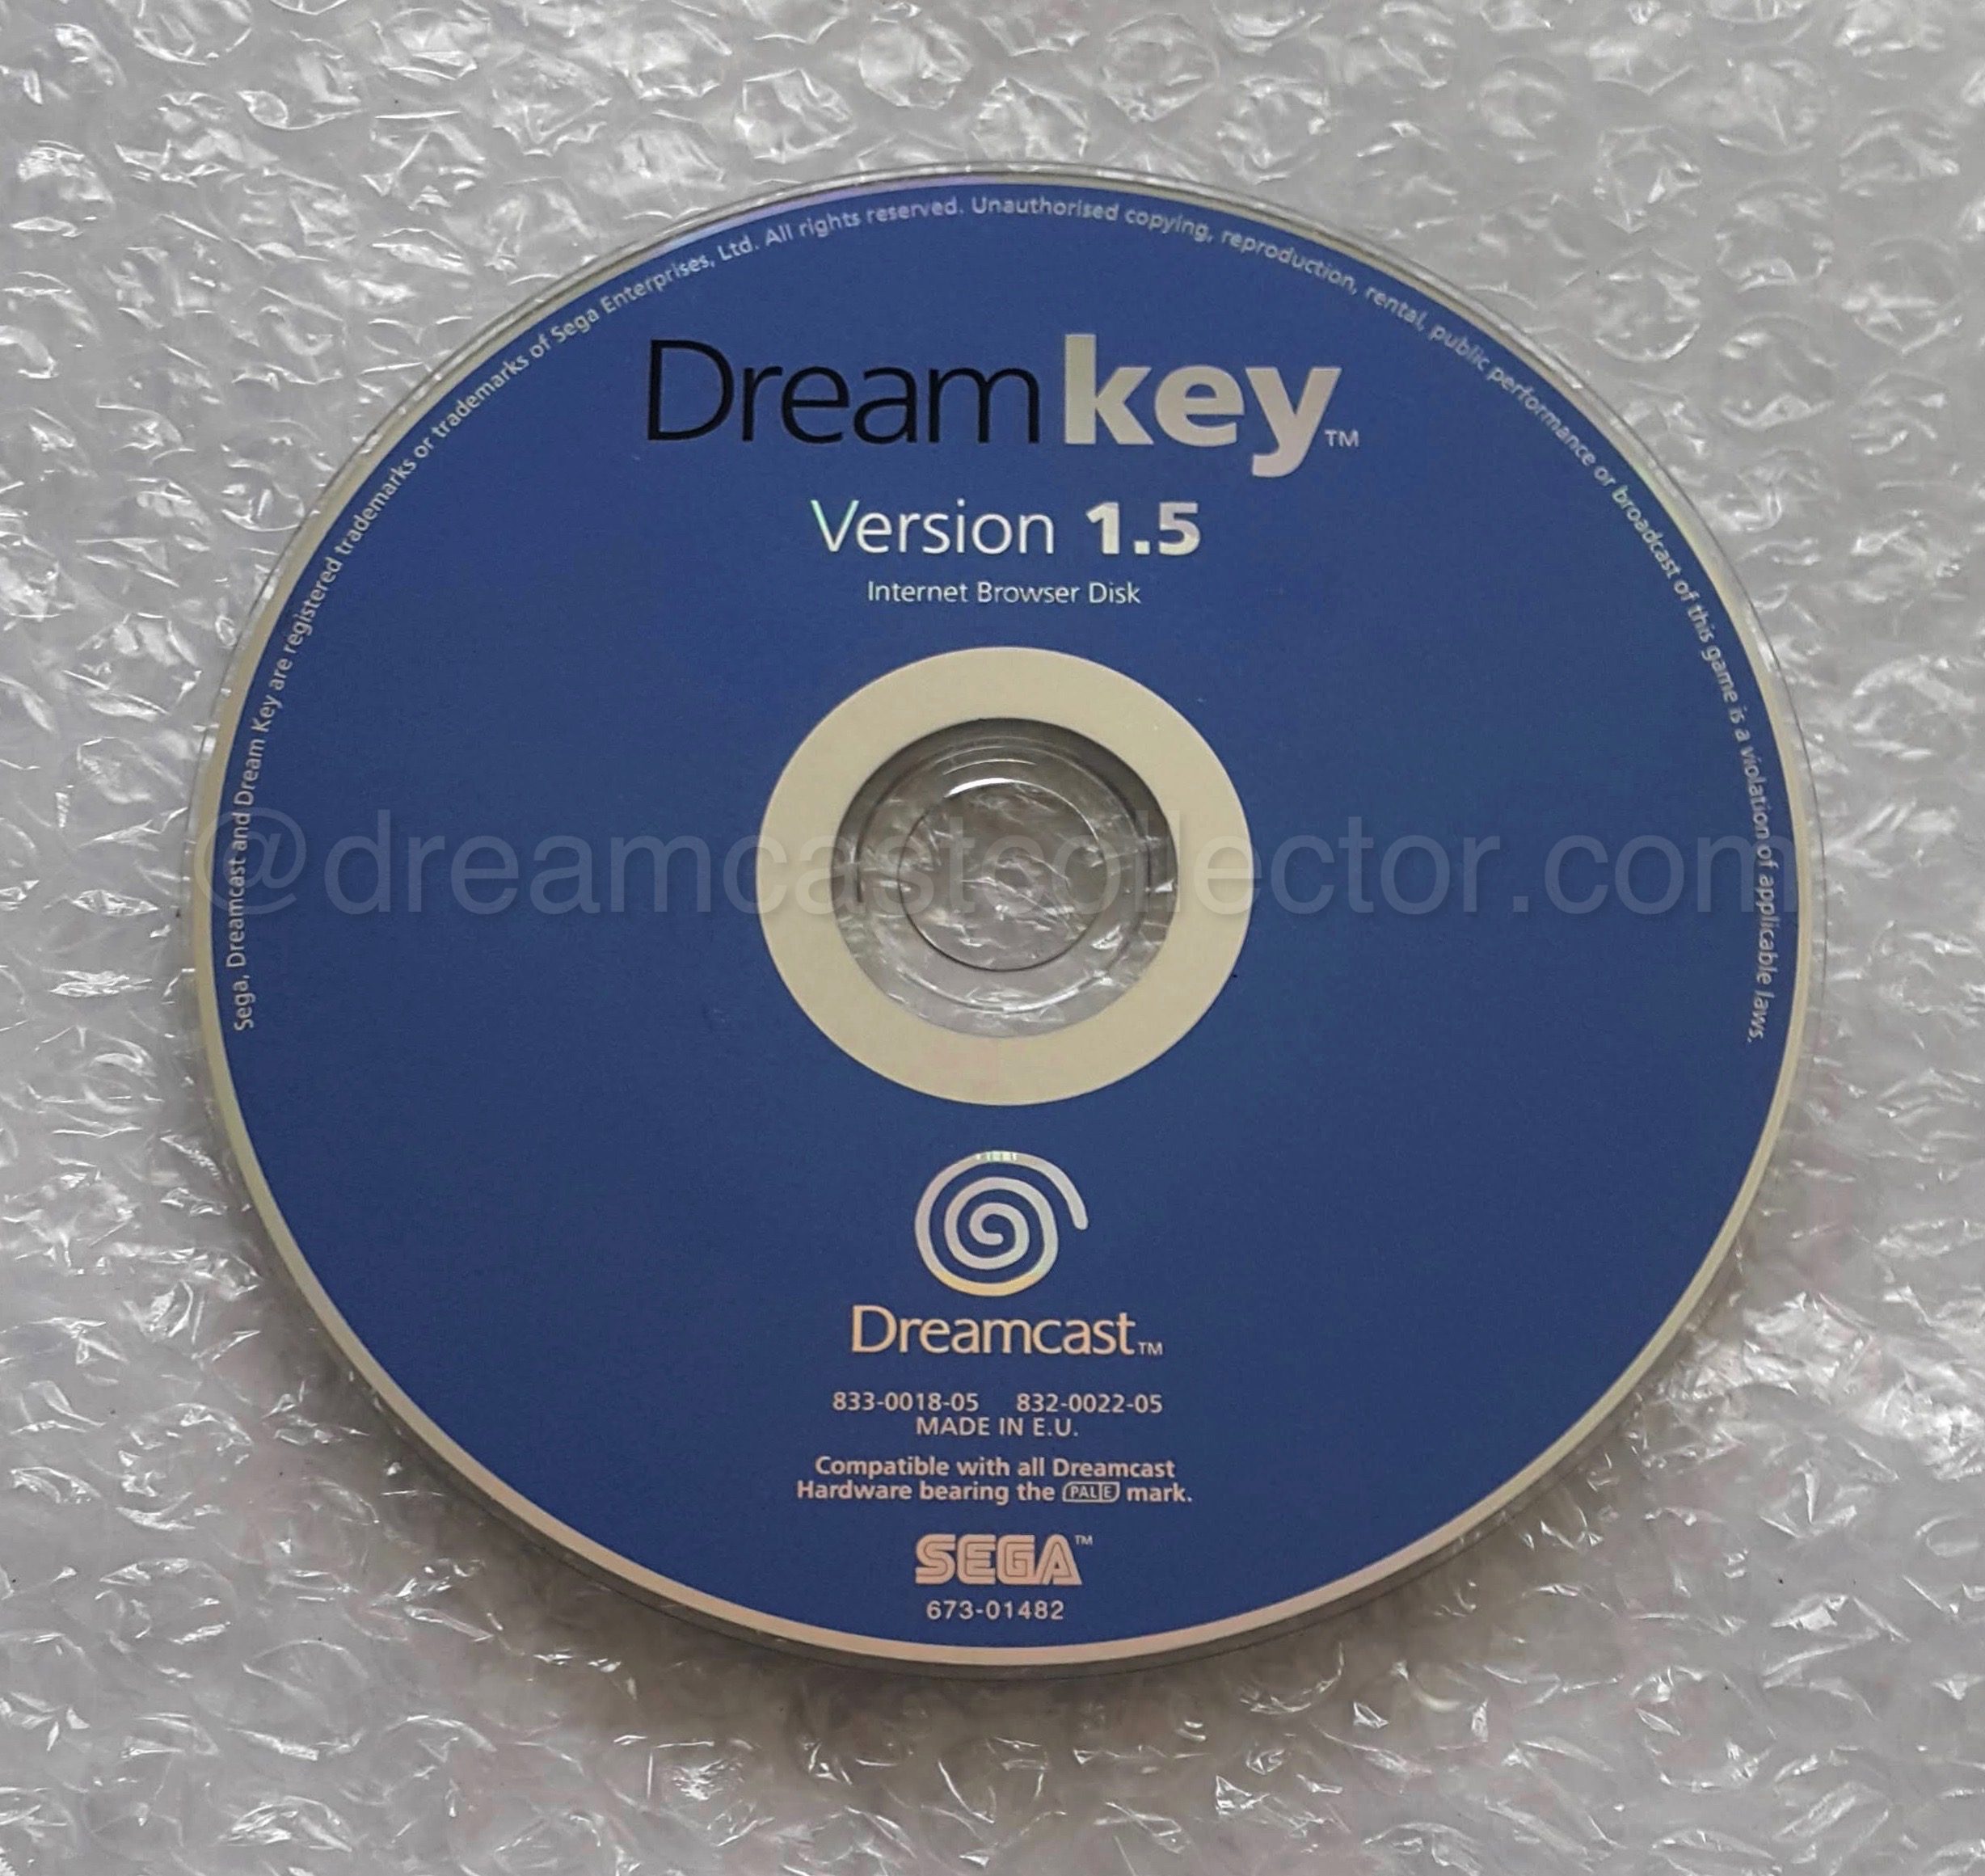 To be completely honest the updated Version 1.5 branding is hardly inspiring and is easily overlooked to stop this situation occurring with the disc SEGA wisely chose a different colour for the disc label which instantly differentiates between releases. The actual design is exactly the same as the previous edition with the version 1. 5 branding having taken the place of both the French & Spanish languages.